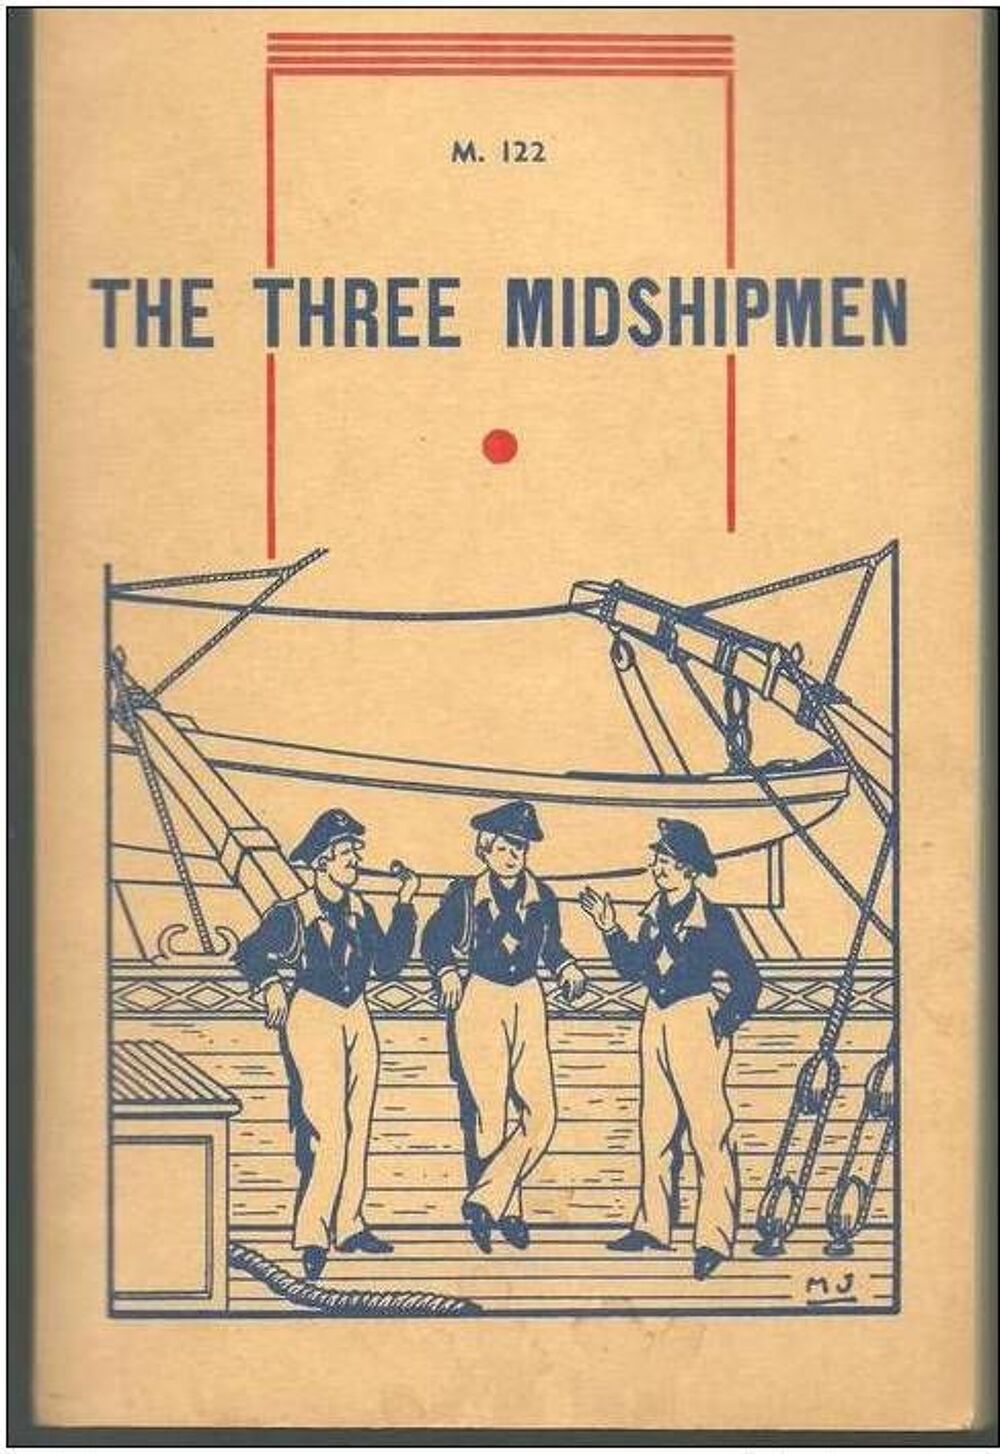 Editions MENTOR - The Three Midshipmen by H.G.W. KINGSTON Livres et BD